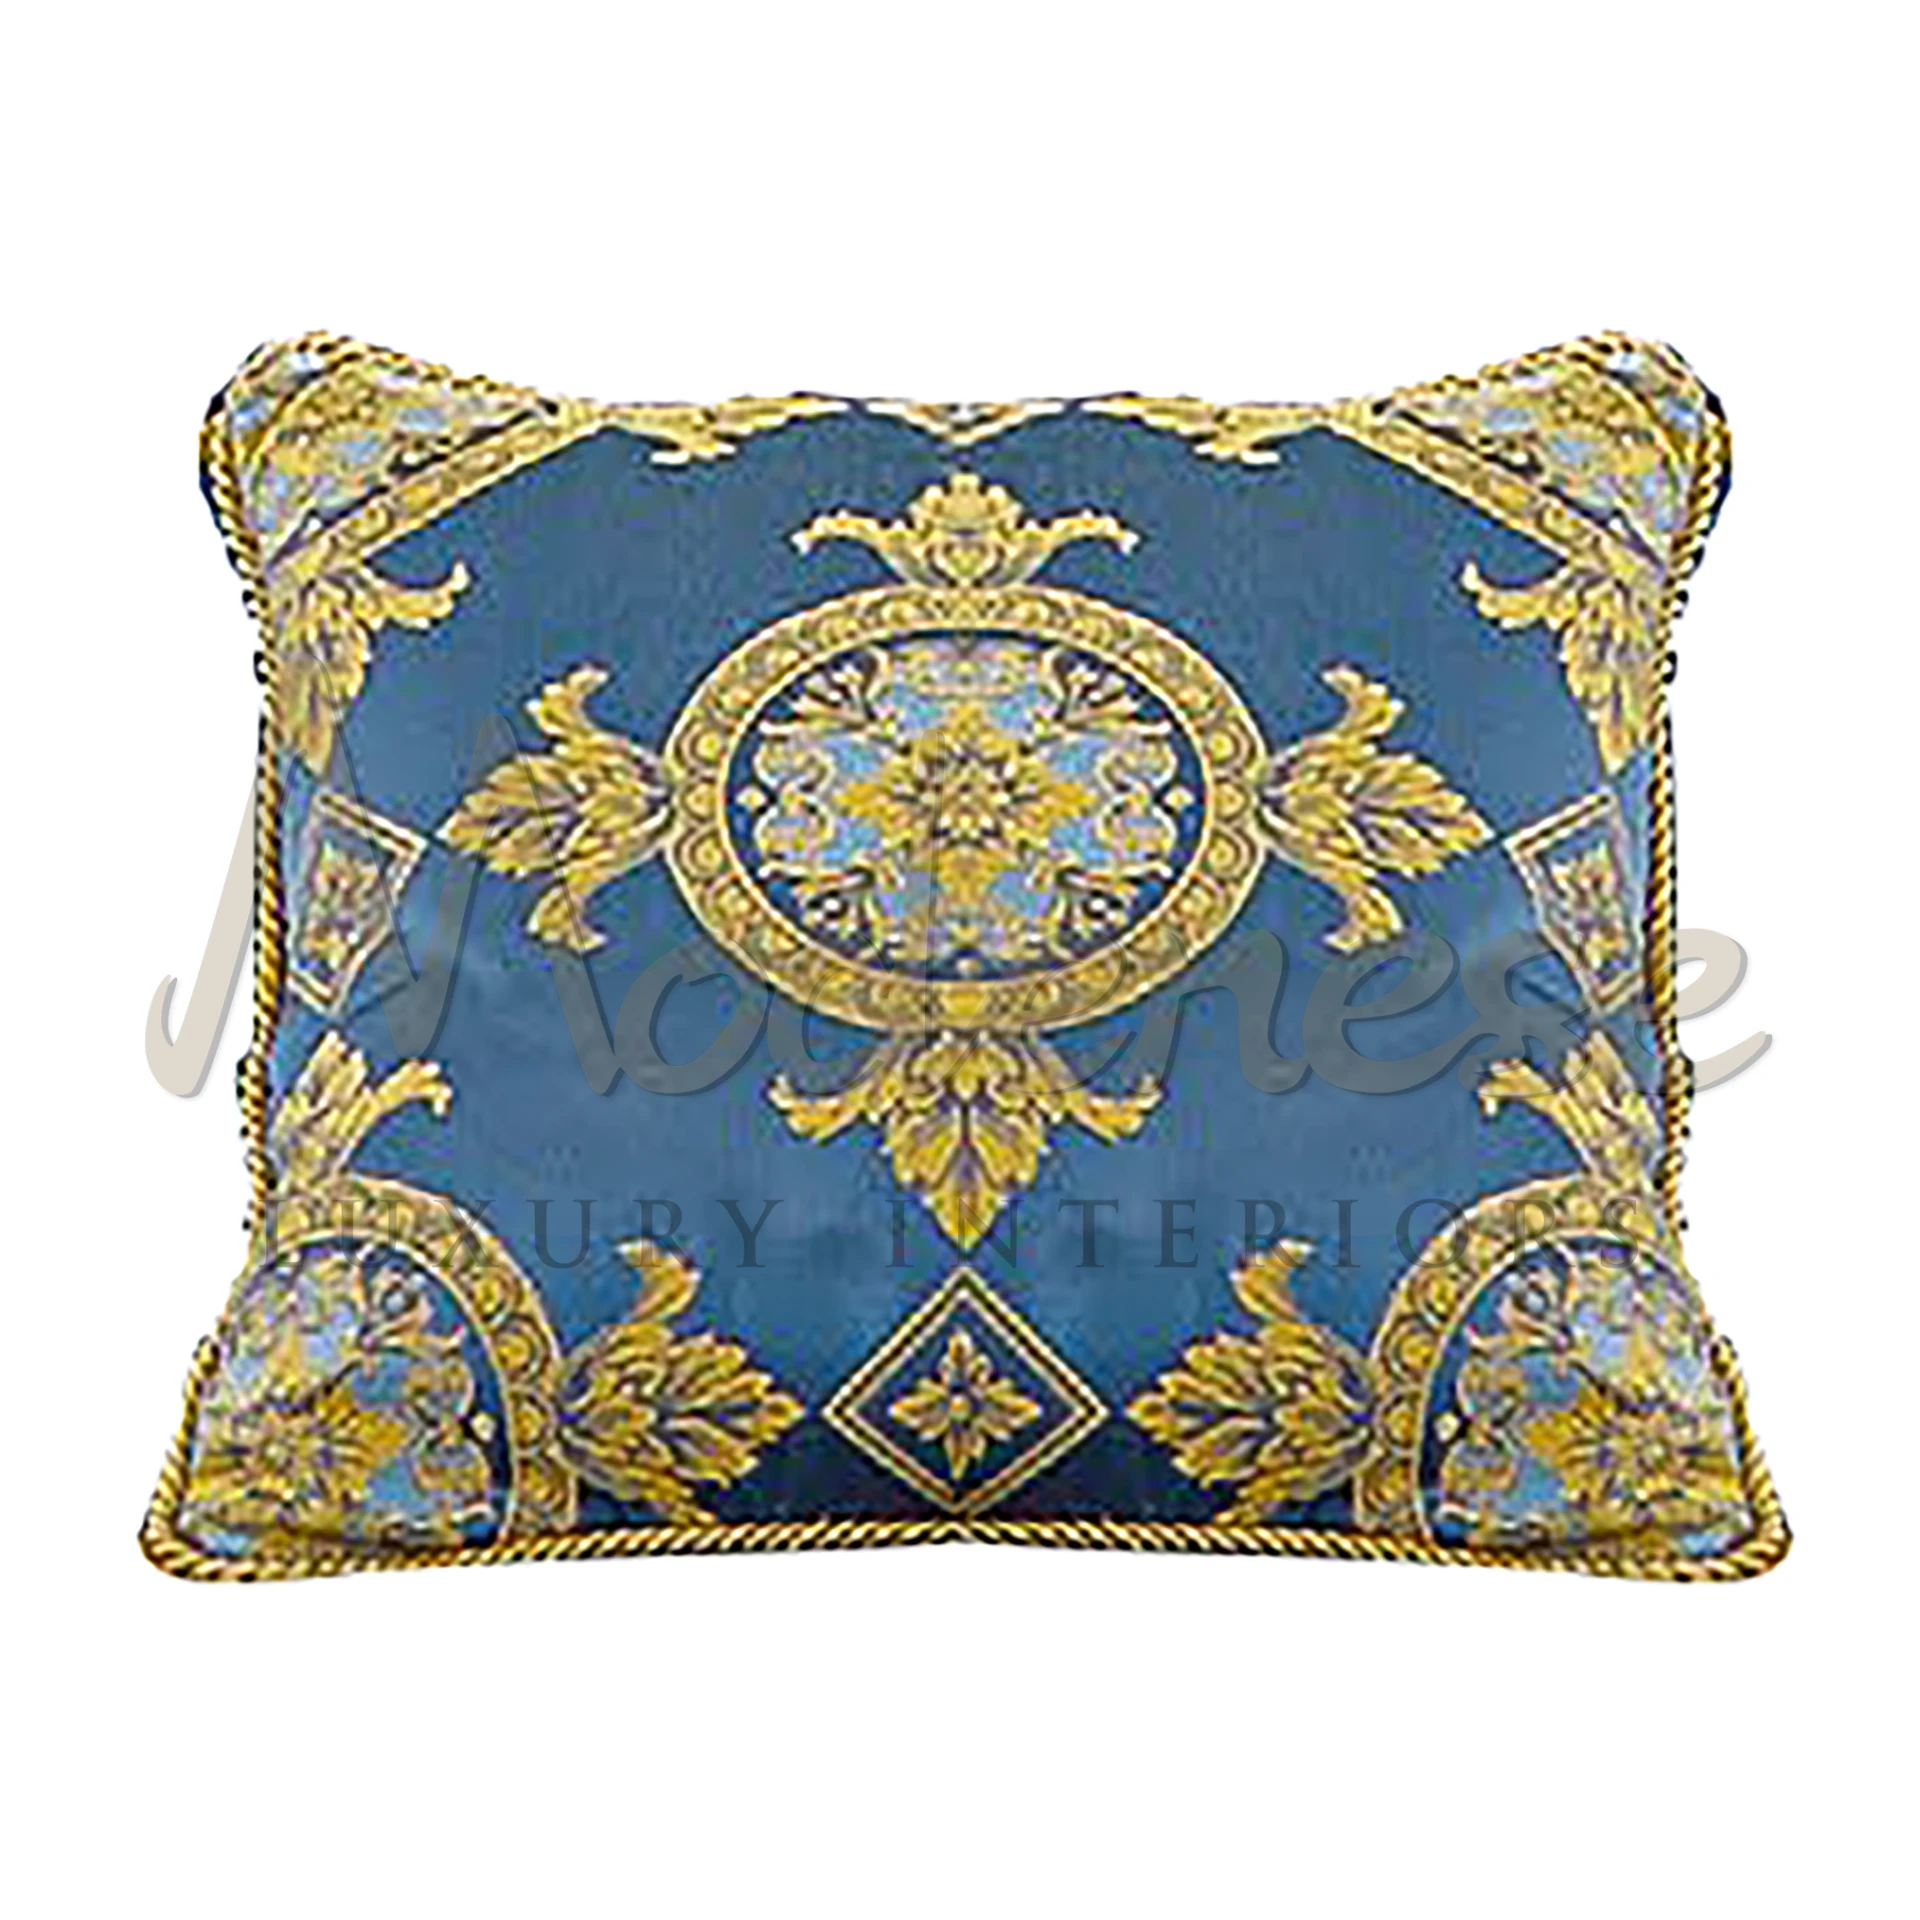 Traditional Blue Pillow in luxurious velvet, silk, or brocade, showcasing Italian craftsmanship and sumptuous texture.